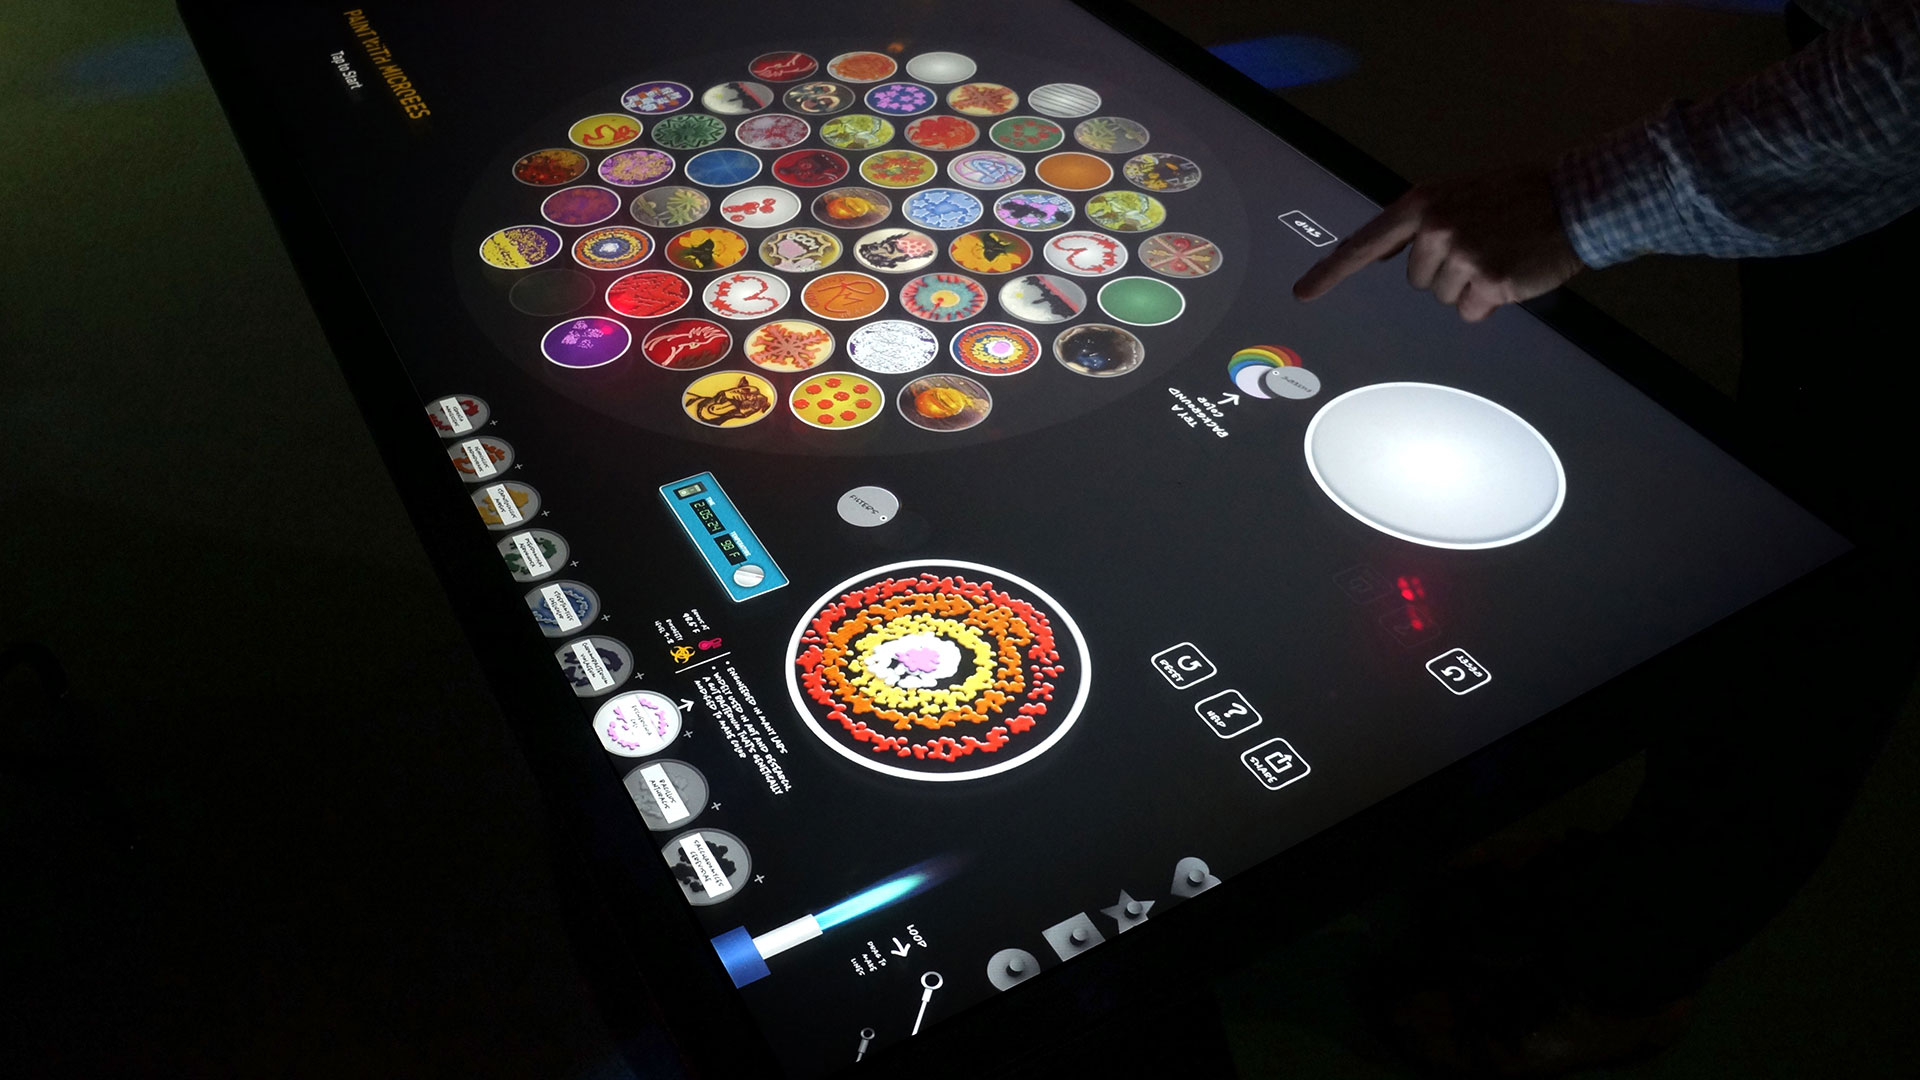 A large multitouch table interface allows up to four groups to create artworks in parallel.